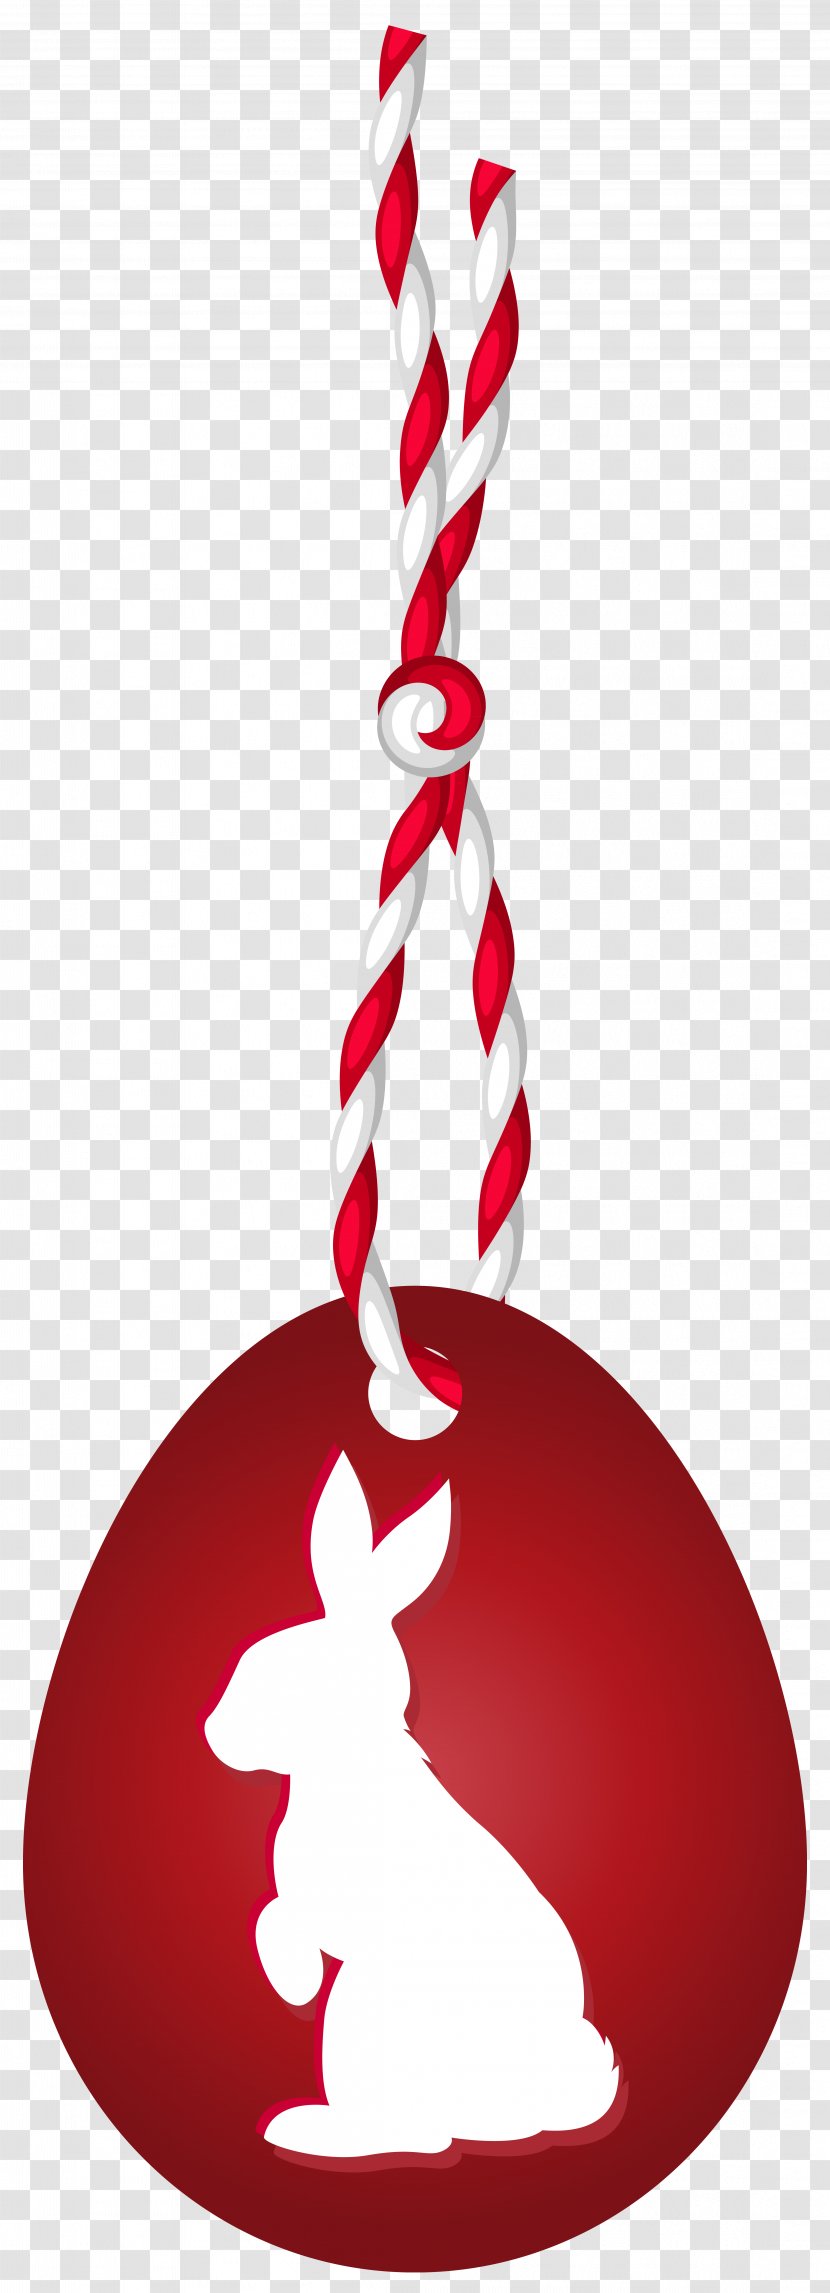 Red Easter Egg Clip Art - Christmas - Hanging With Bunny Image Transparent PNG